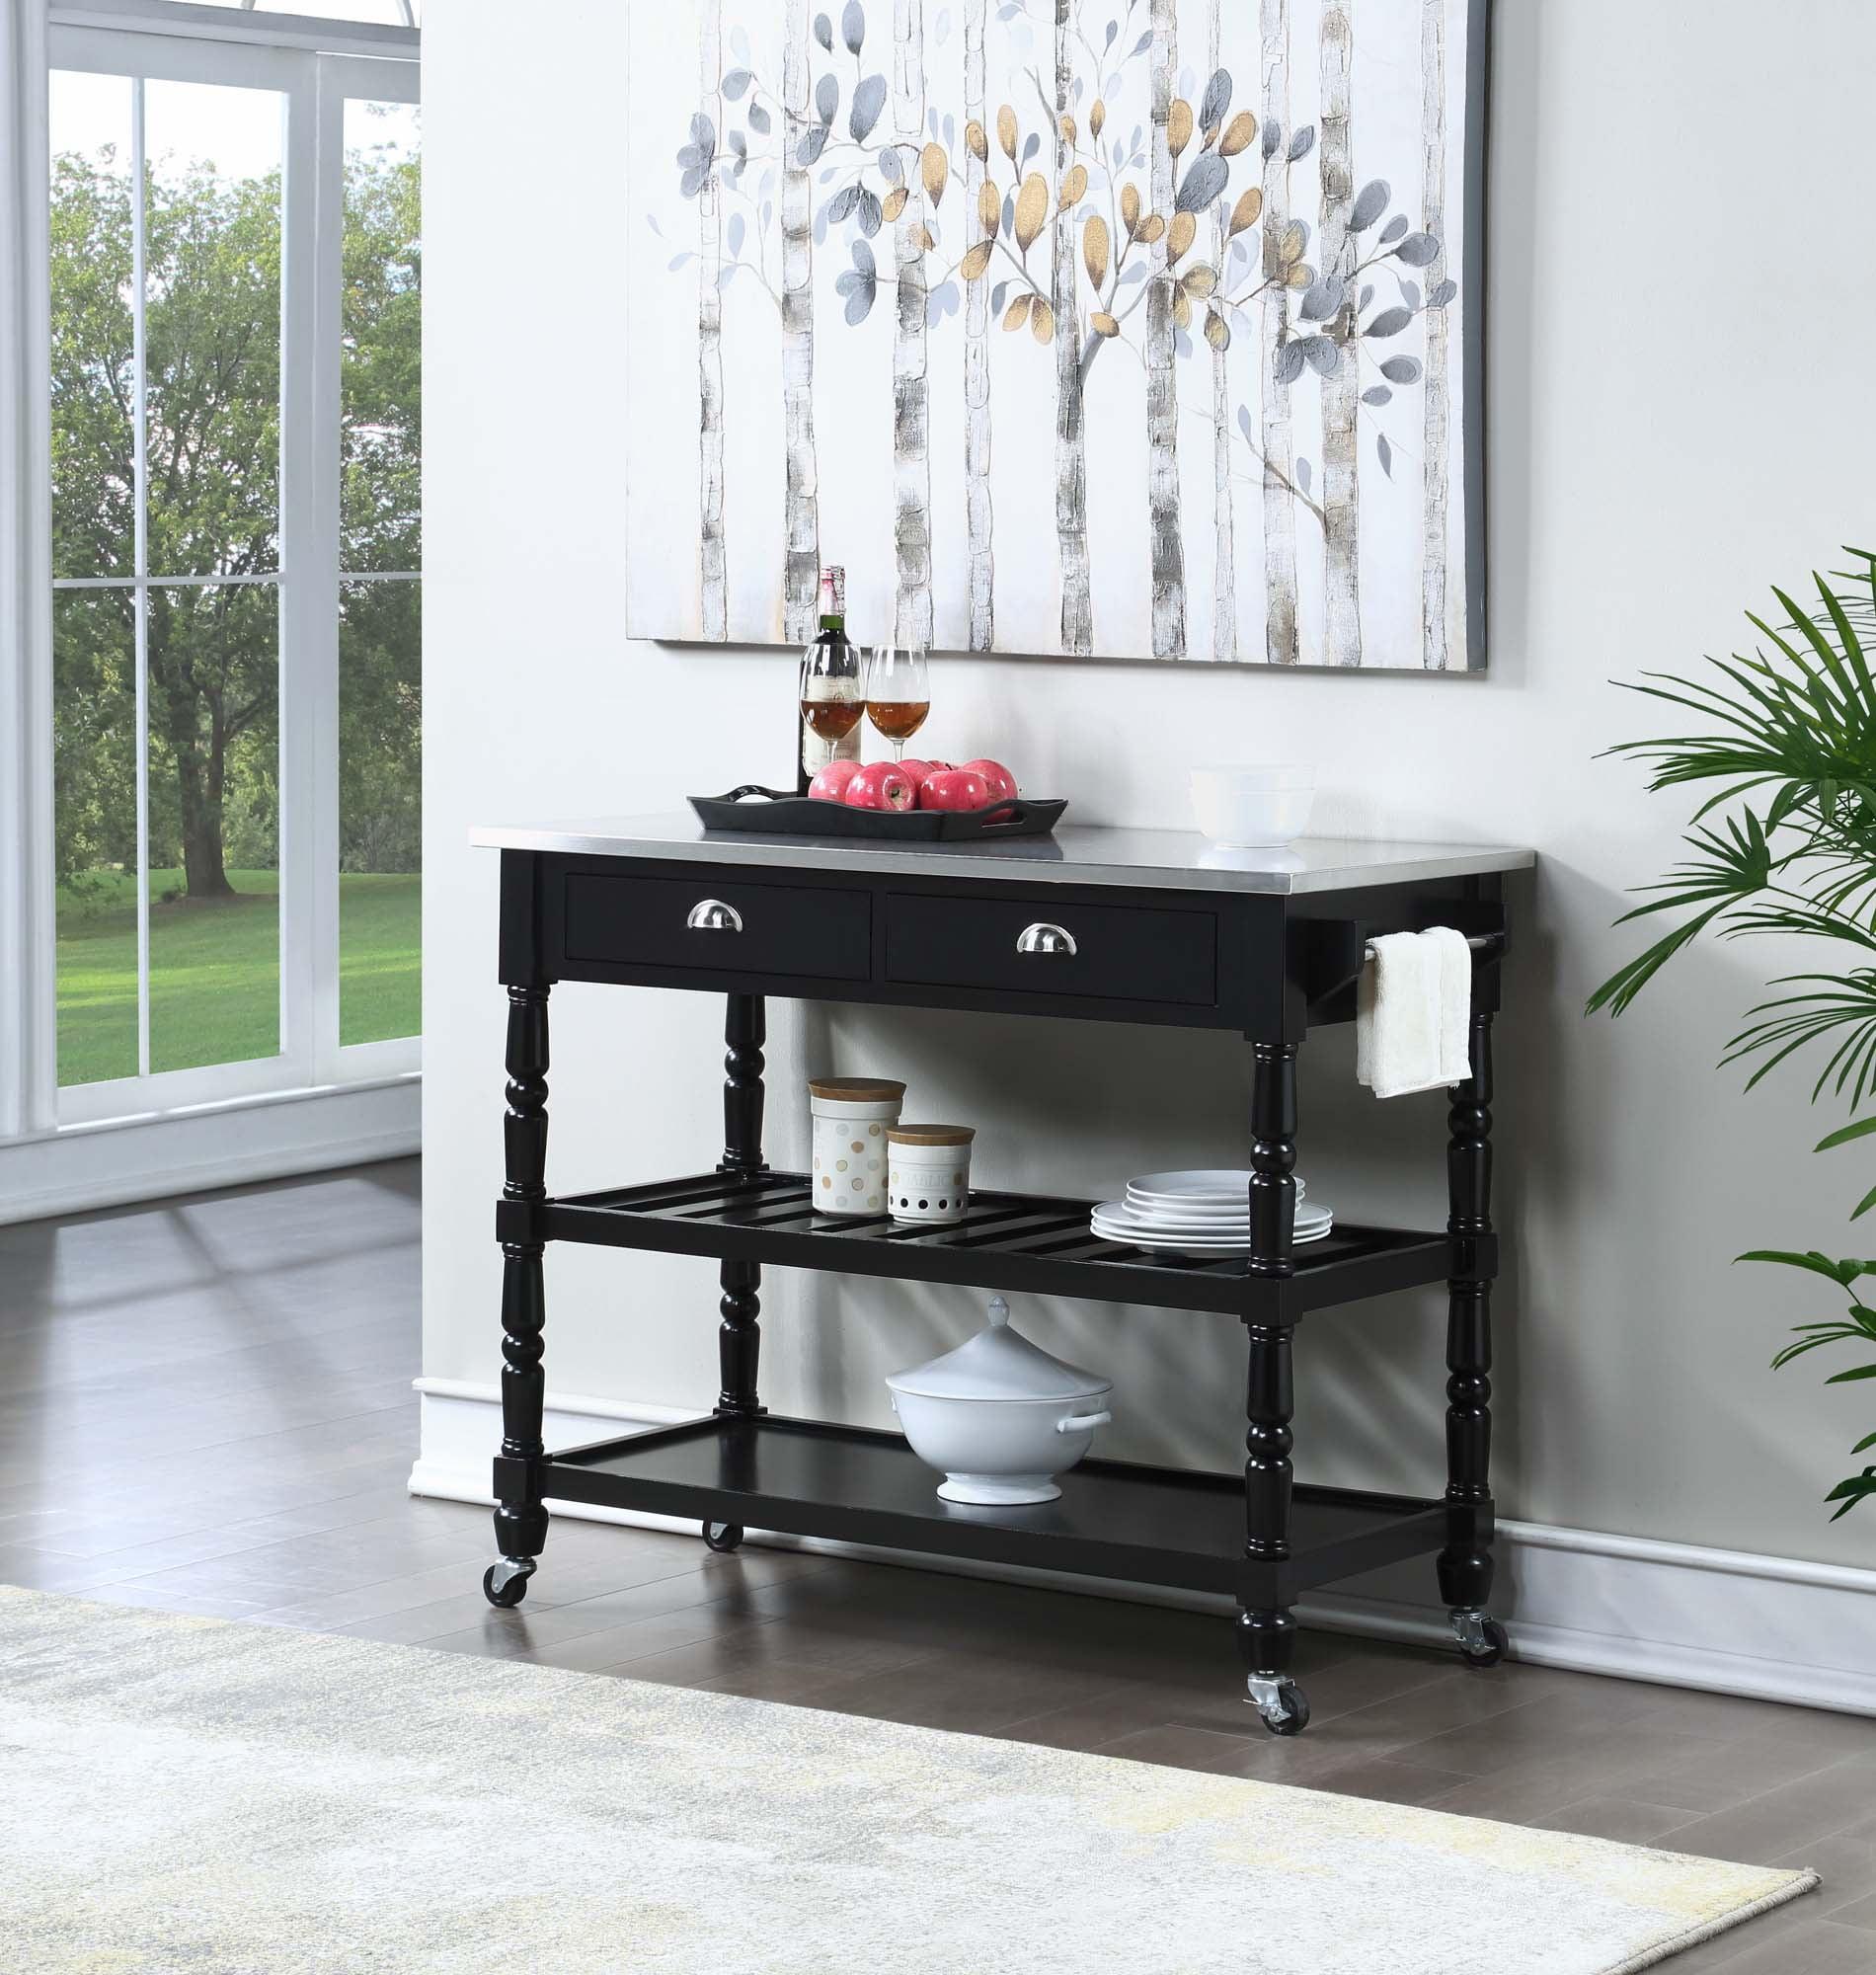 French Country Elegance Stainless Steel & Black Kitchen Cart with Wine Storage